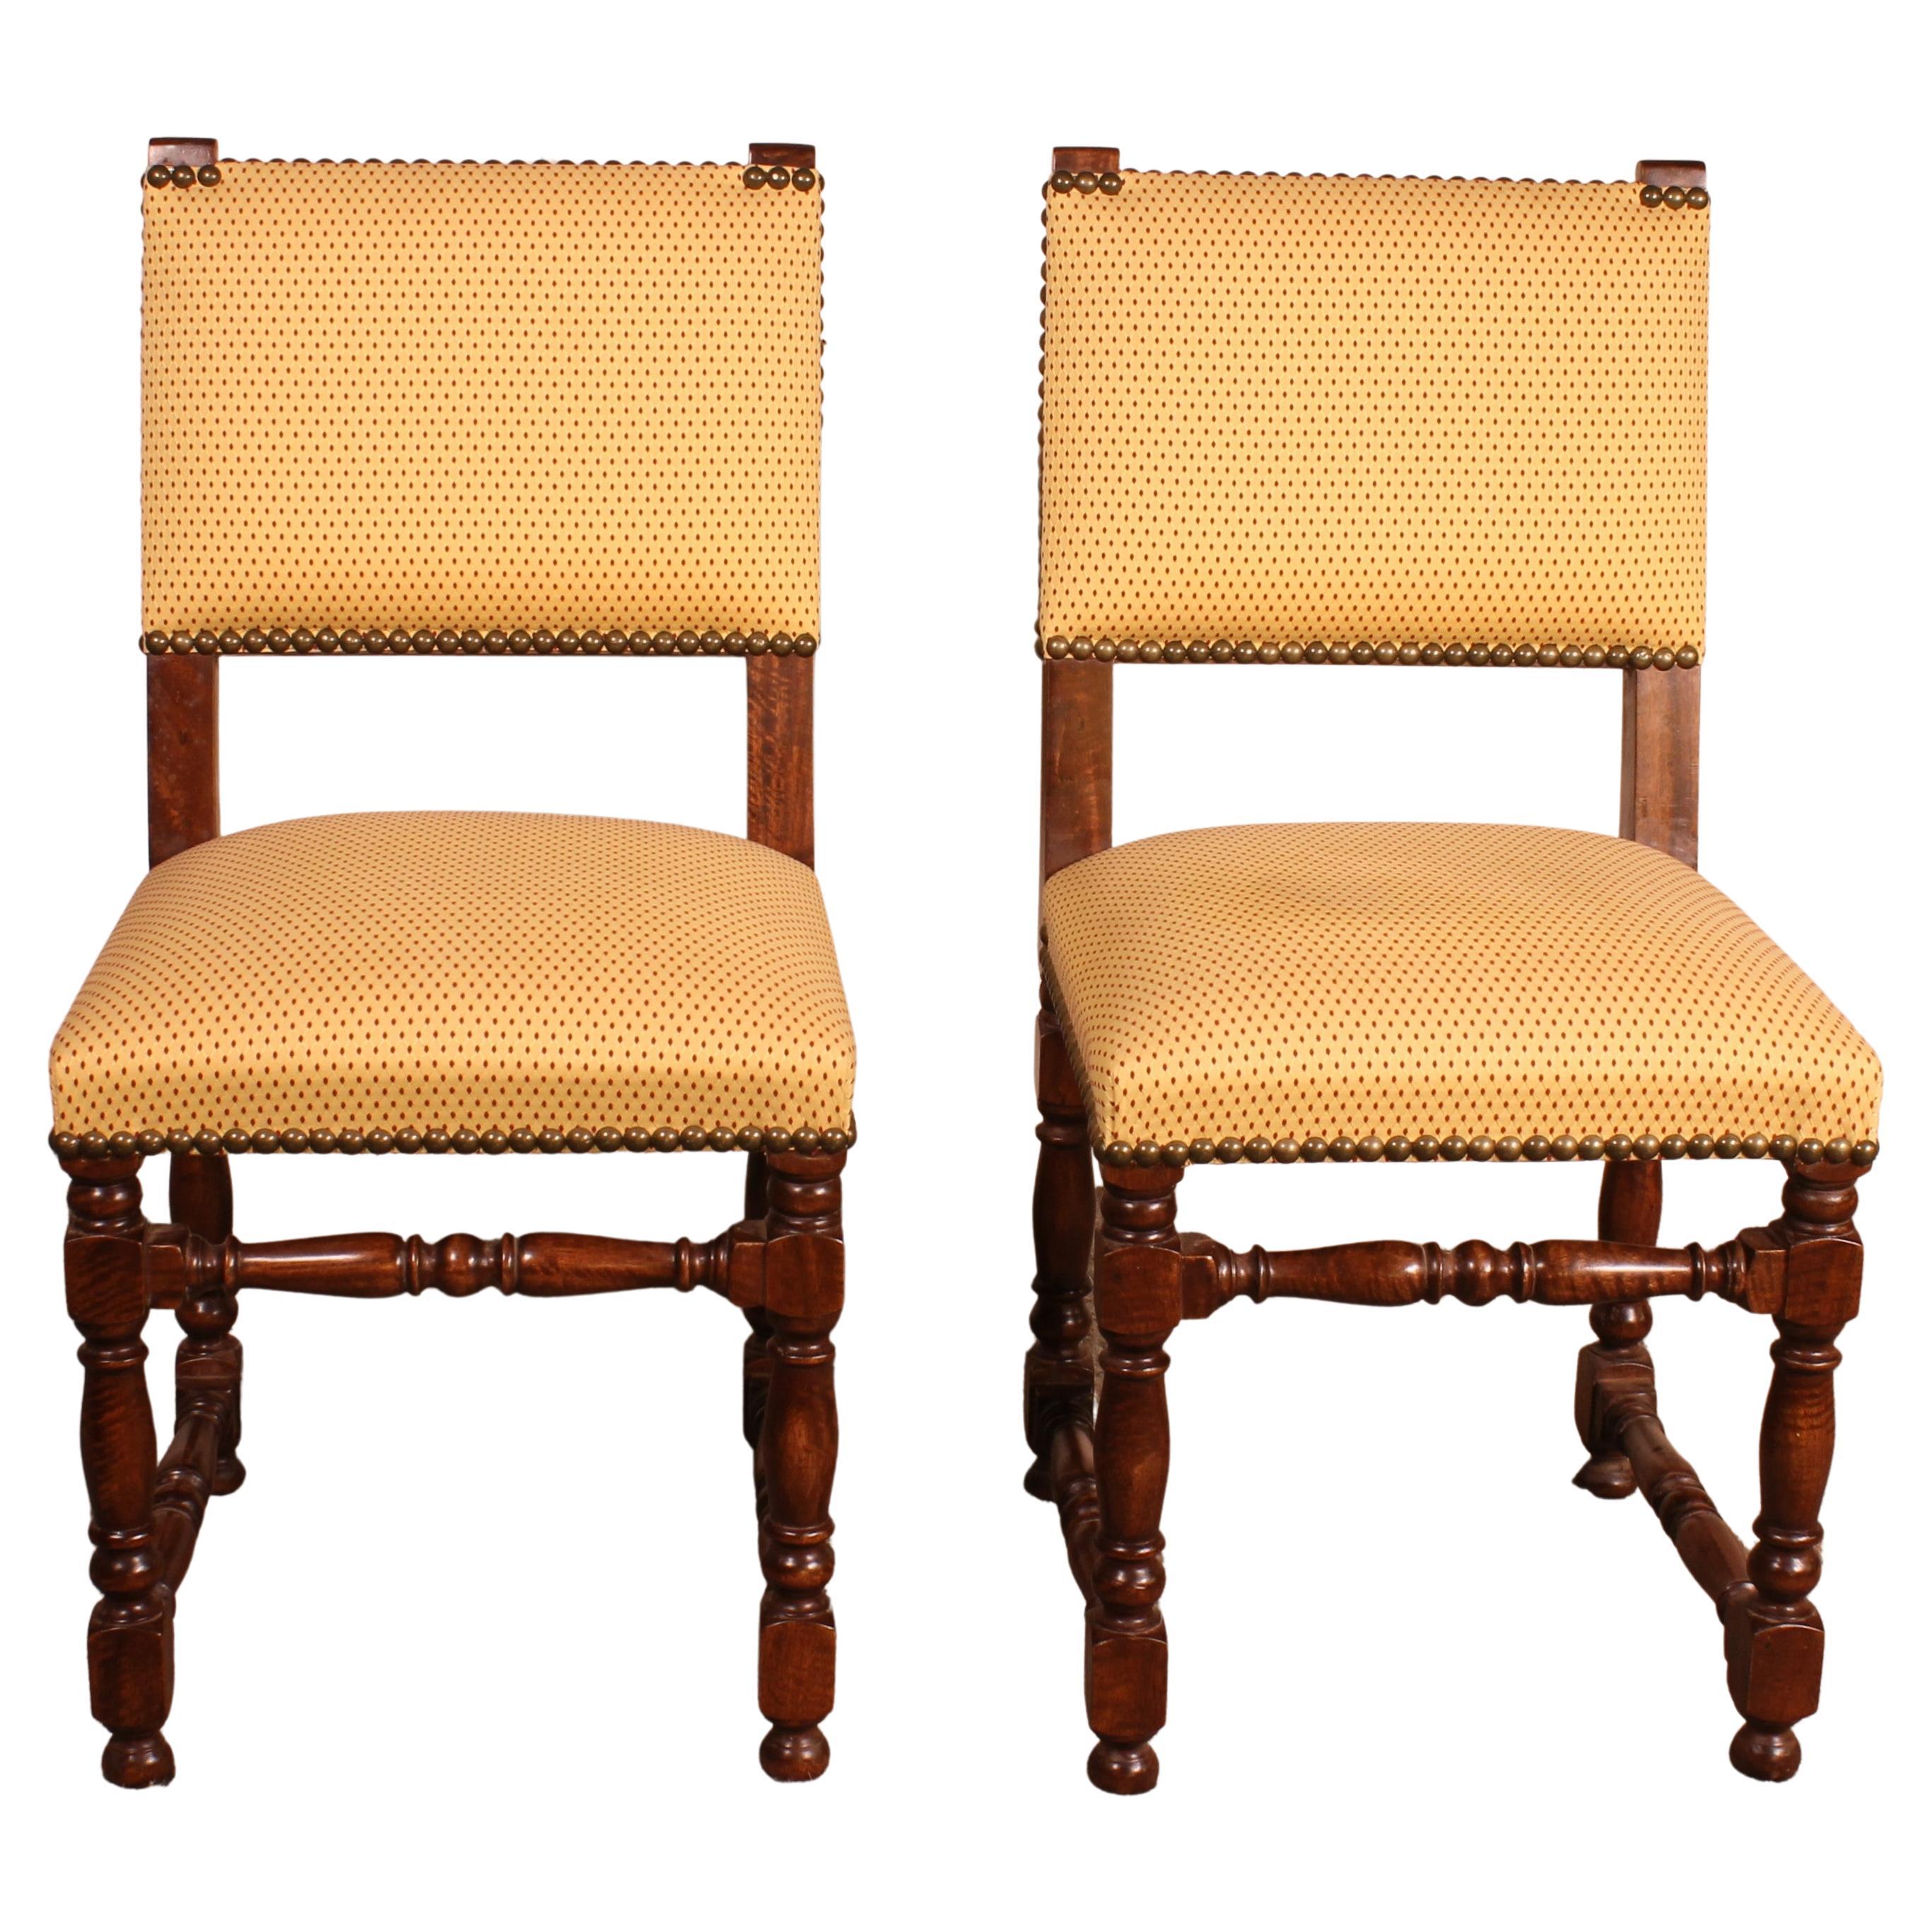 2 Louis XIII Style Chairs in Walnut